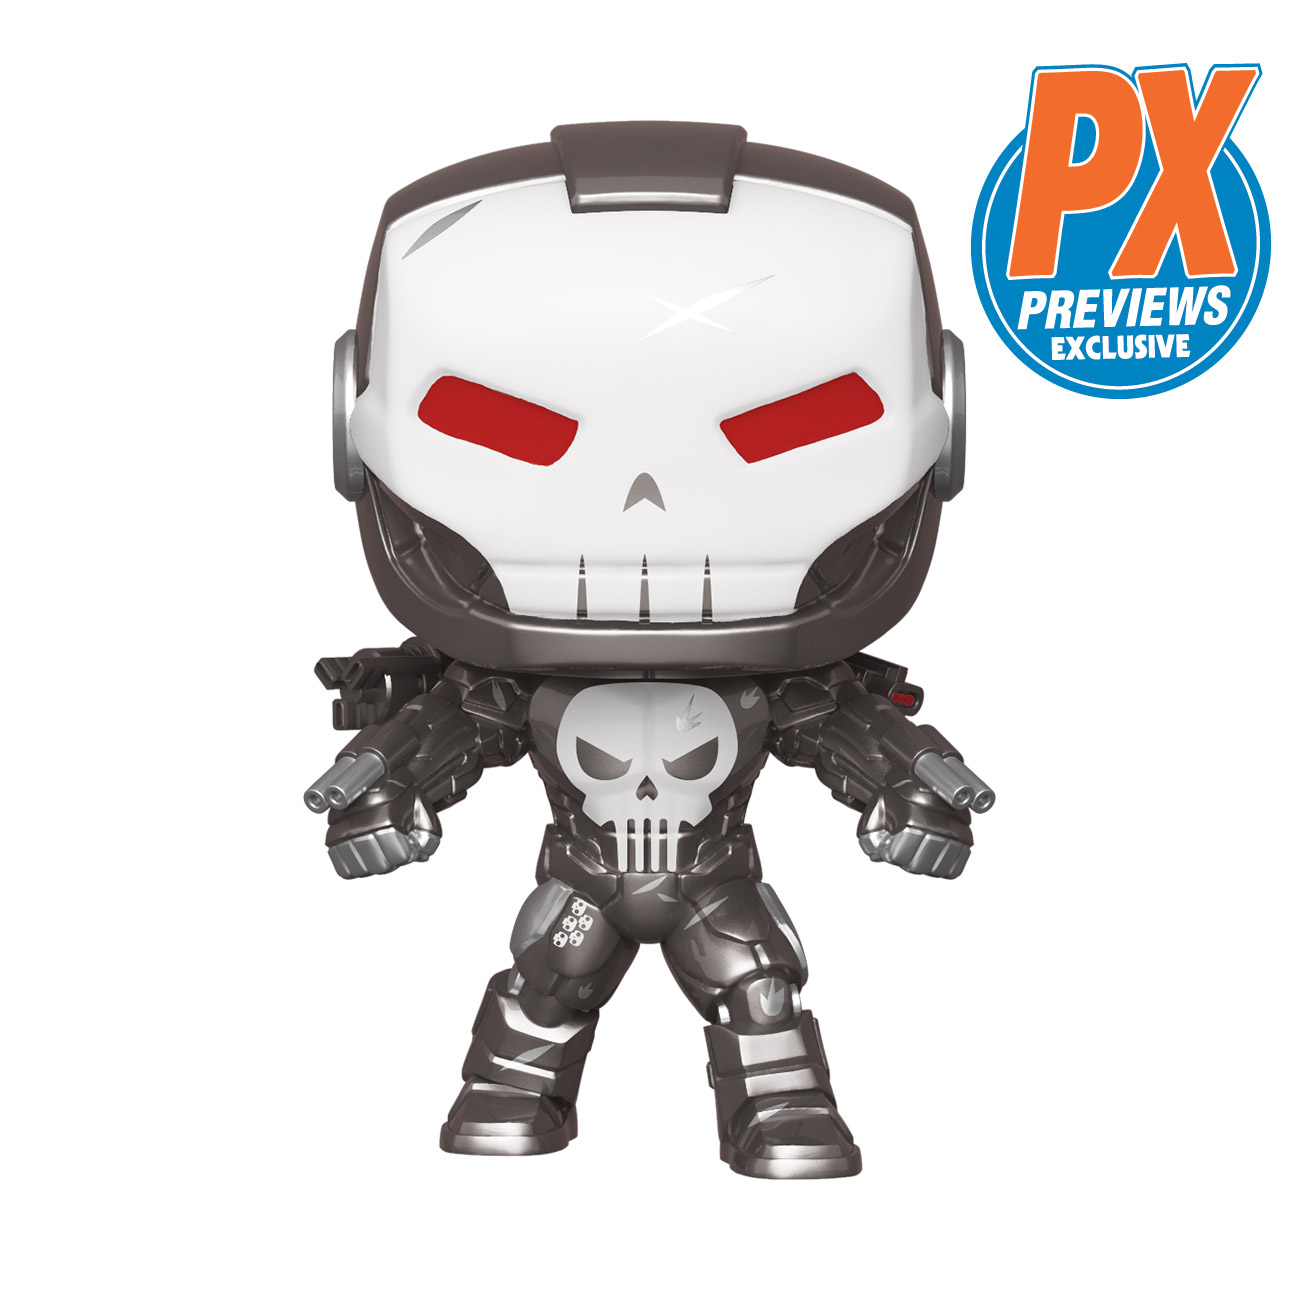 the punisher suits up as war machine for a new previews exclusive pop previews world the punisher suits up as war machine